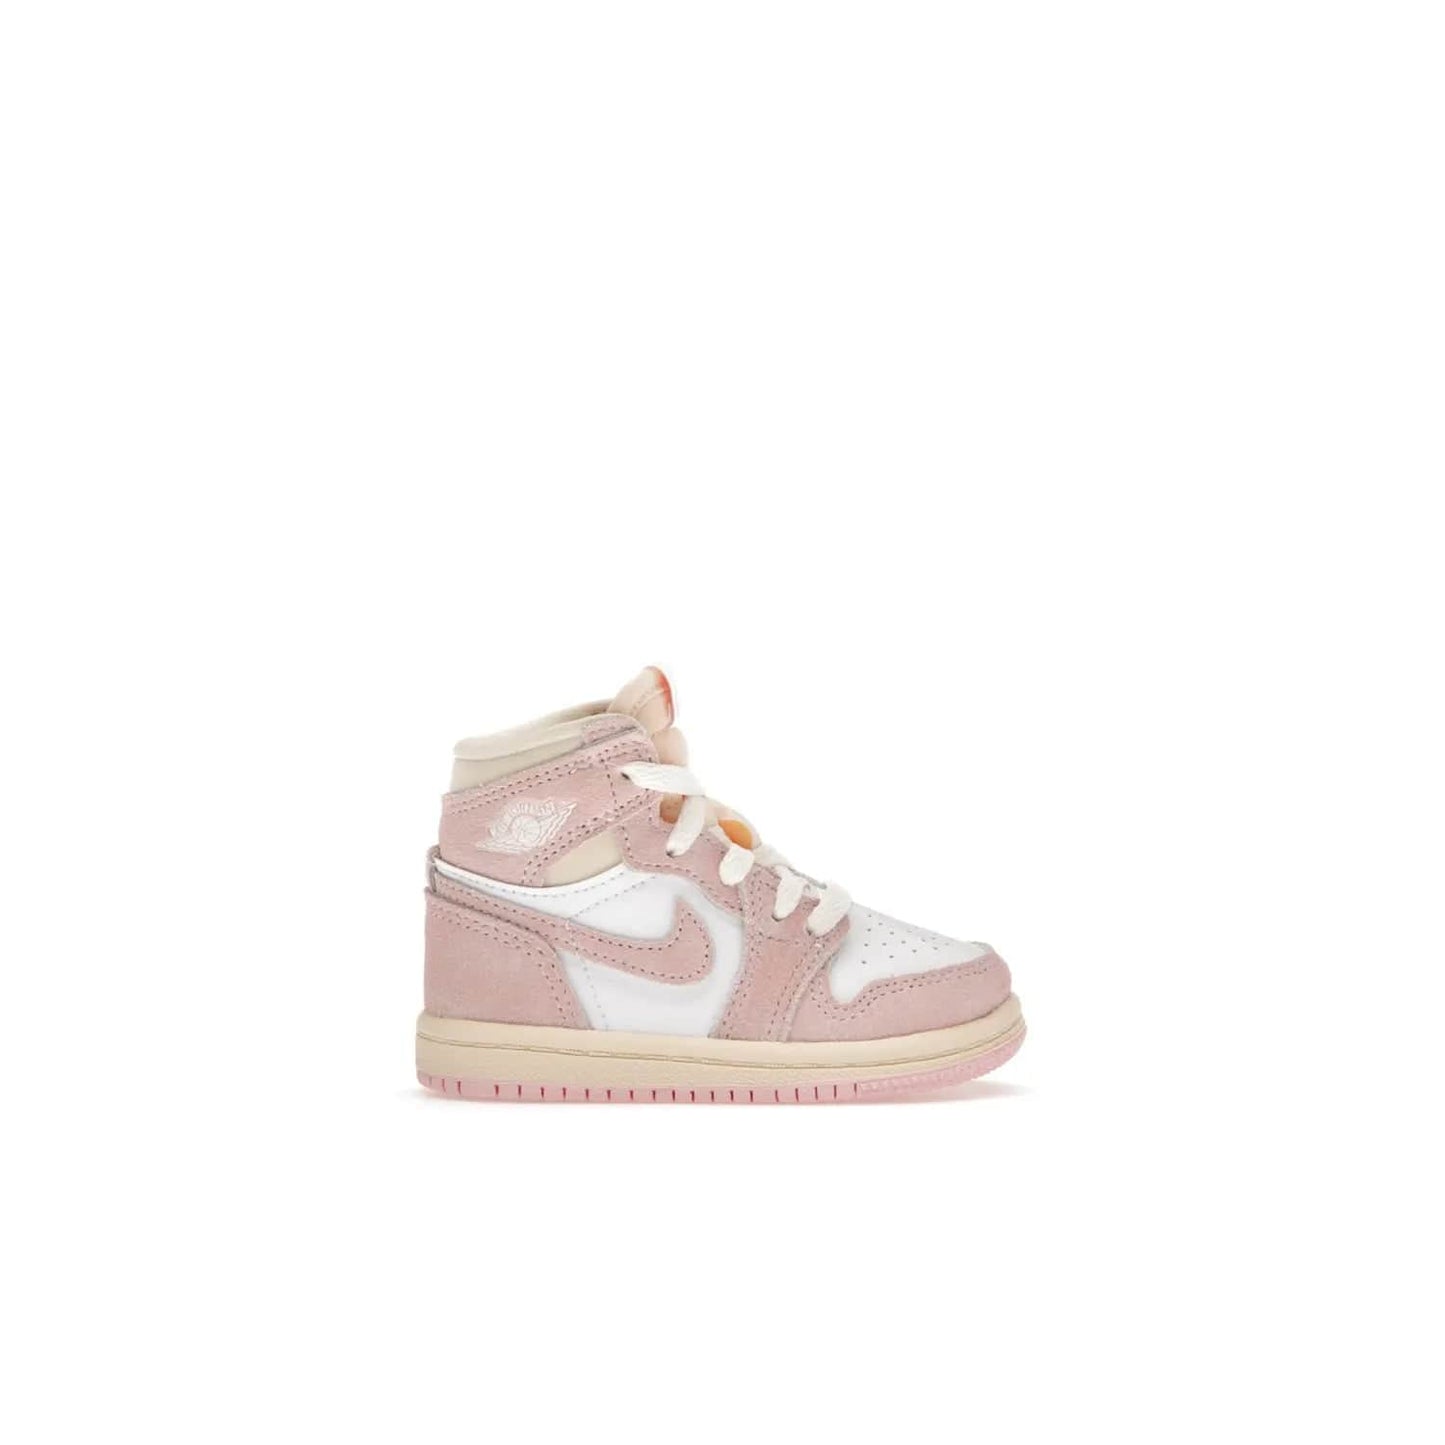 Jordan 1 Retro High OG Washed Pink (TD) - Image 1 - Only at www.BallersClubKickz.com - Retro style meets modern comfort: Introducing the Jordan 1 High OG Washed Pink (TD). Combining Atmosphere/White/Muslin/Sail colors with a high-rise silhouette, these shoes will be an instant classic when they release April 22, 2023.